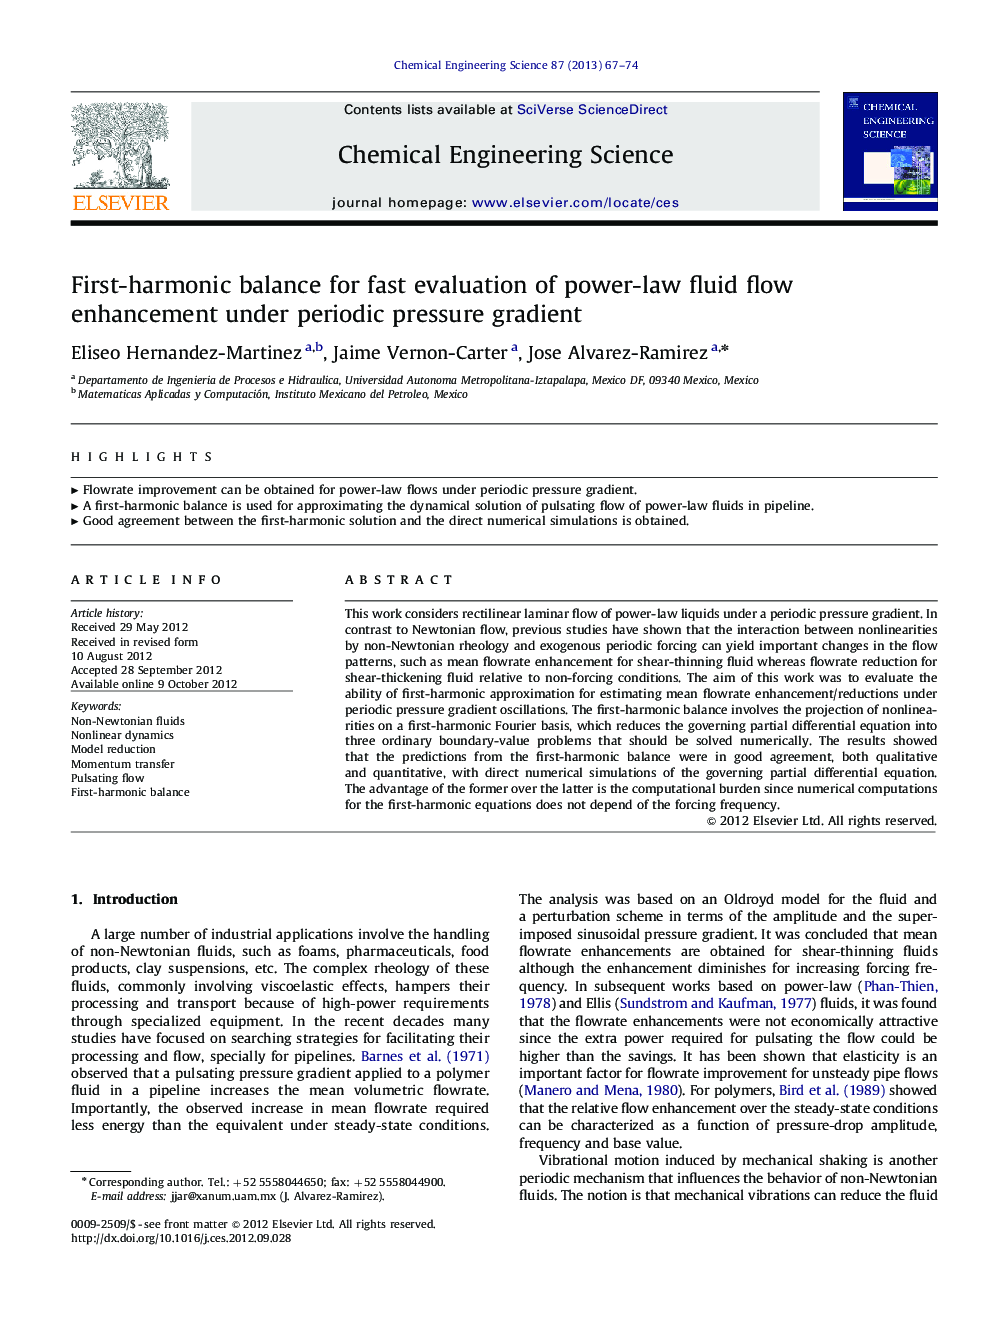 First-harmonic balance for fast evaluation of power-law fluid flow enhancement under periodic pressure gradient